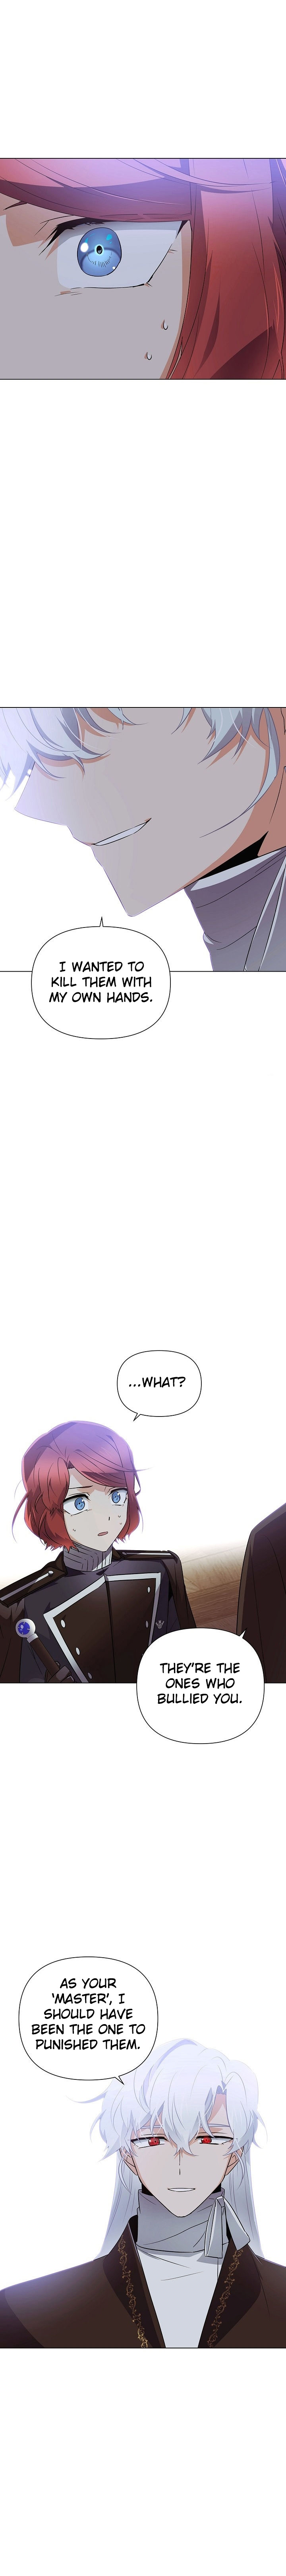 The Villain Discovered My Identity Chapter 51 - Page 9